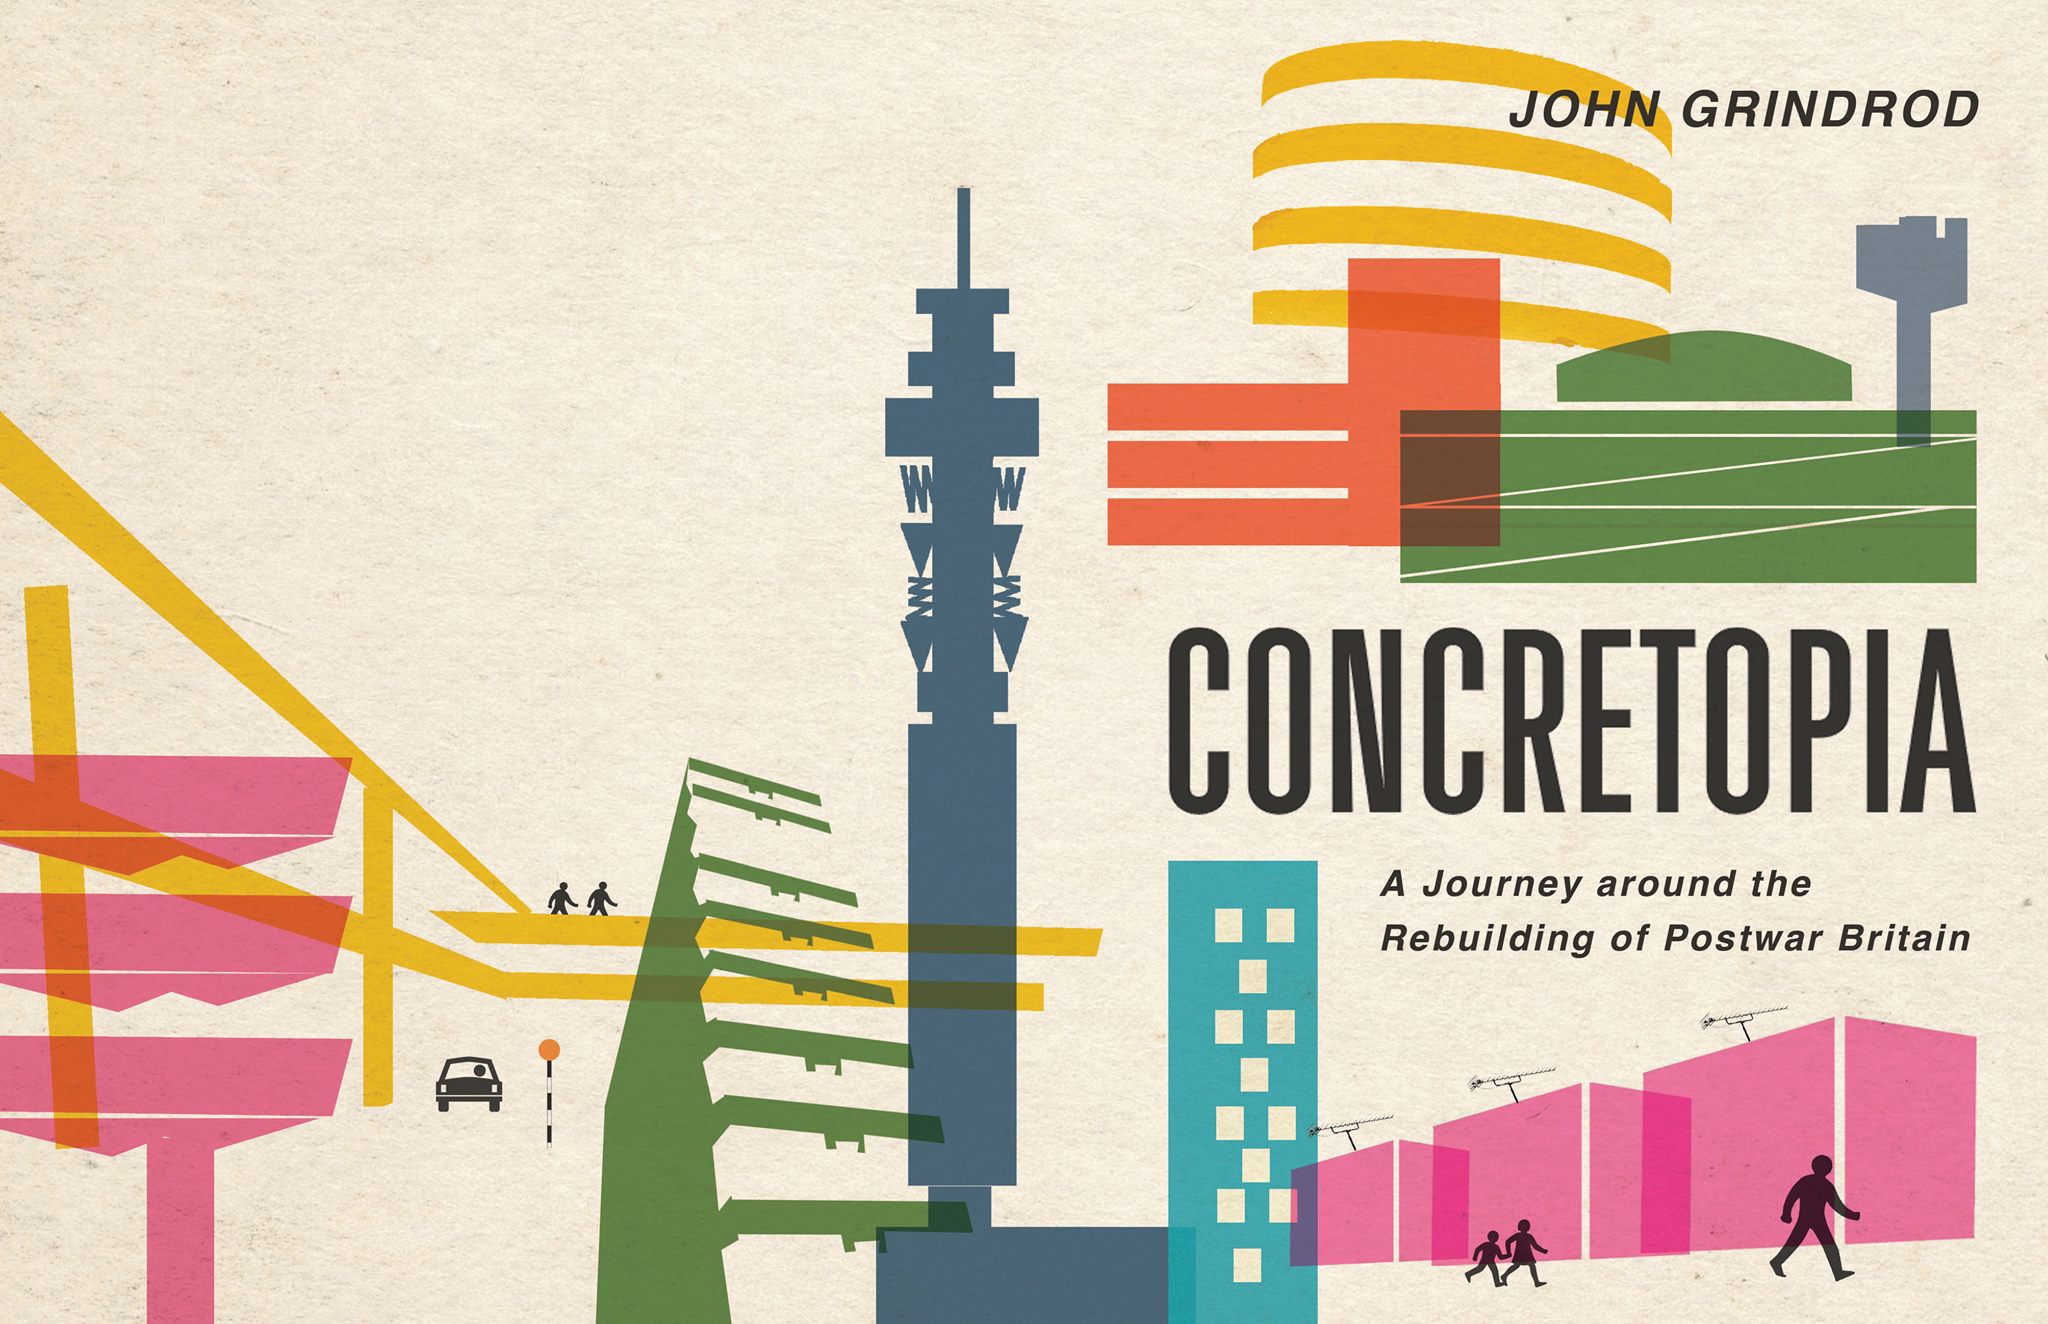 Conretopia- a book by John Grindrod